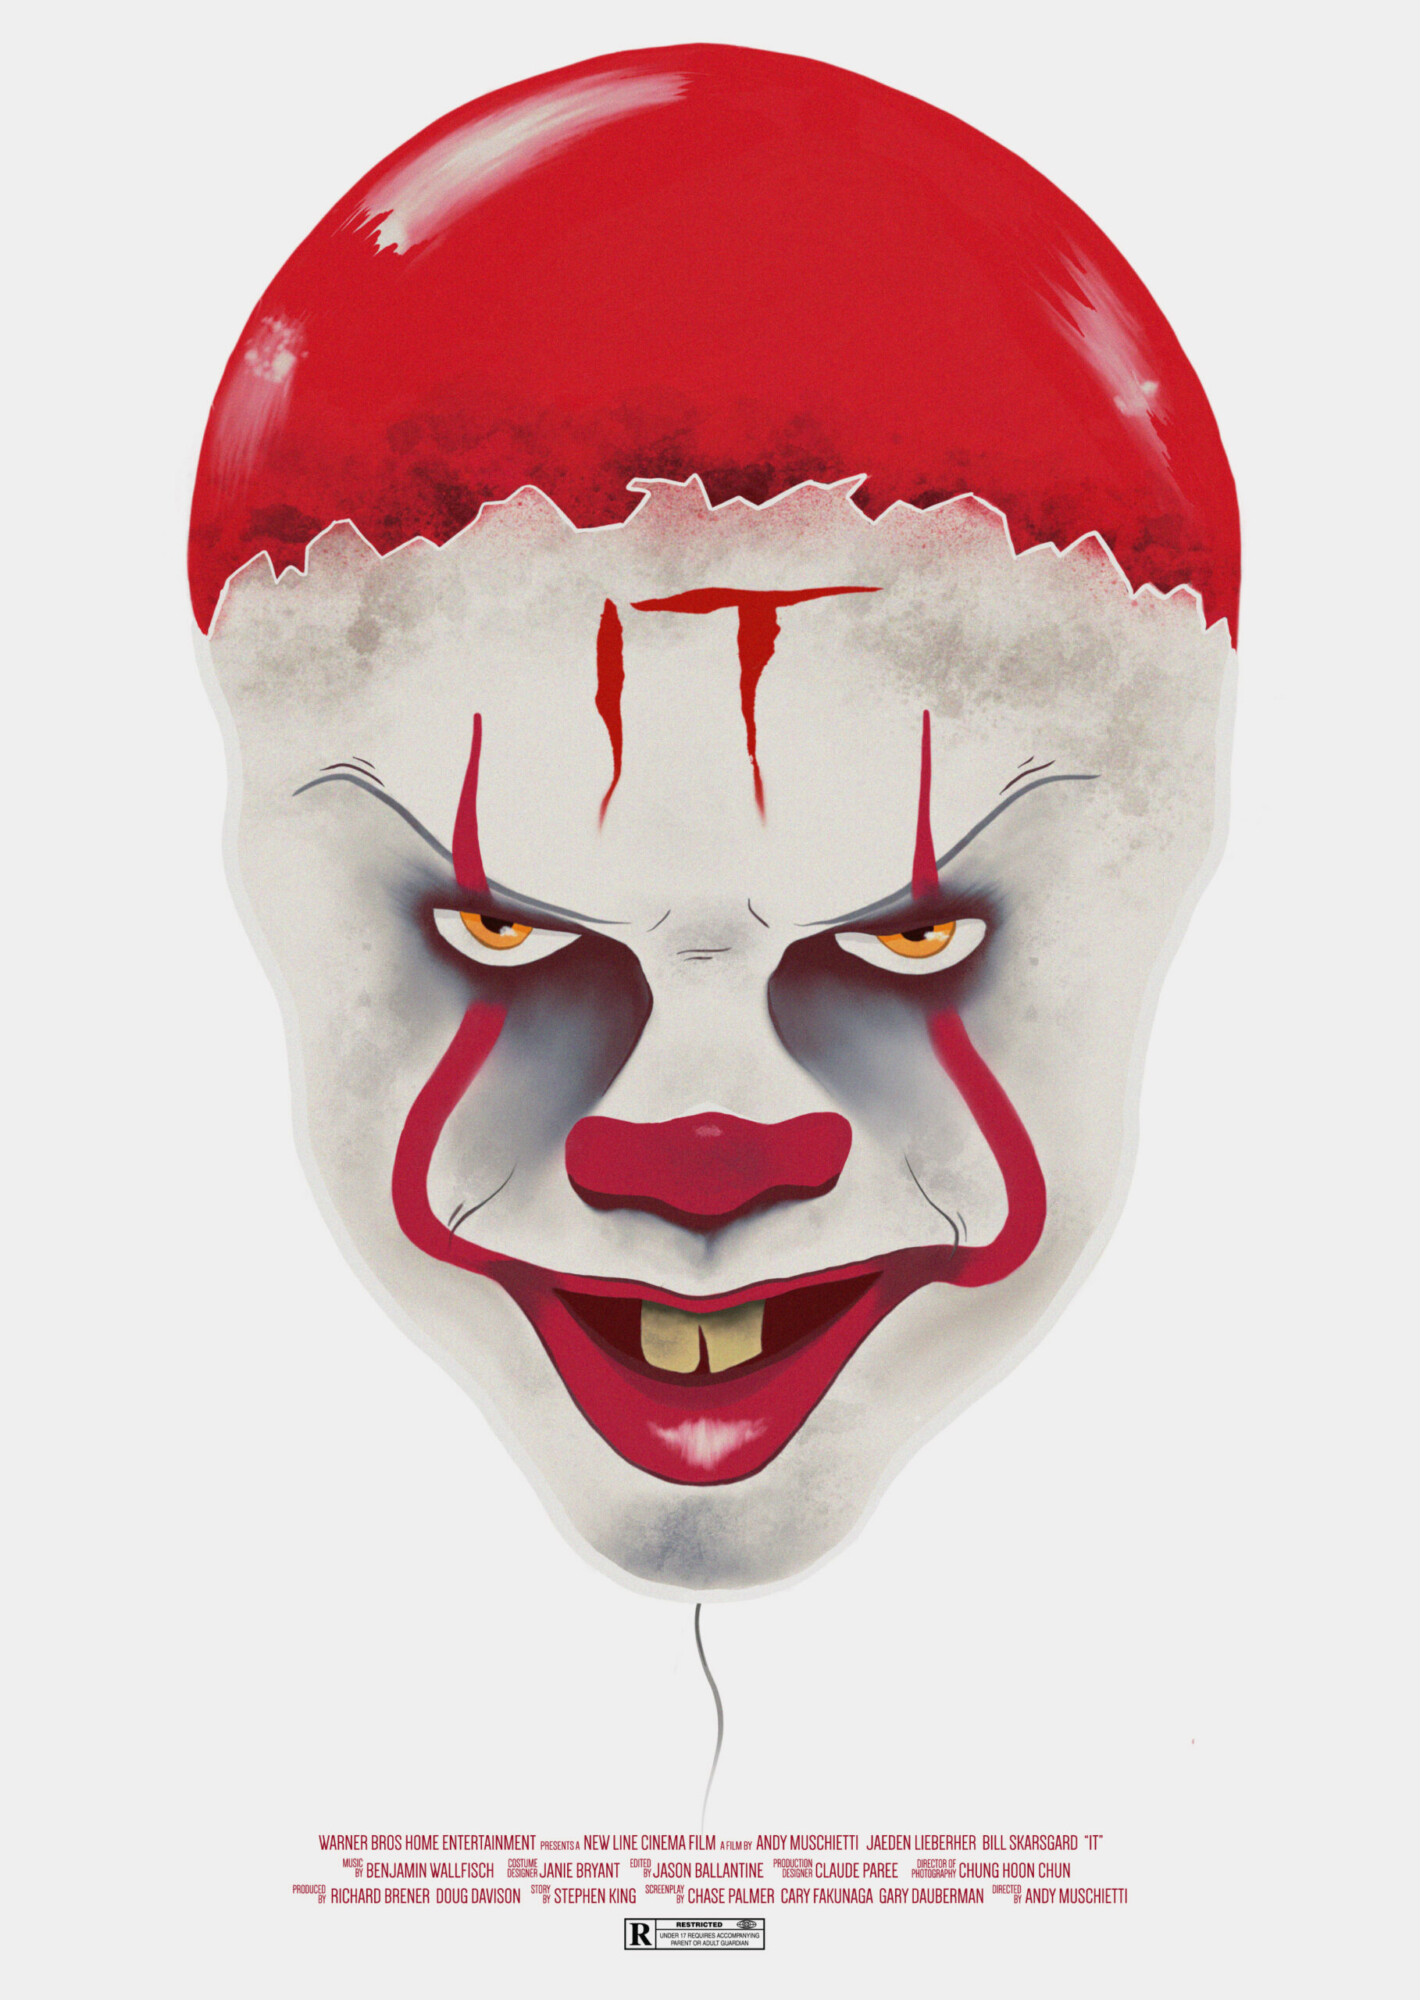 Pennywise Balloon - PosterSpy.